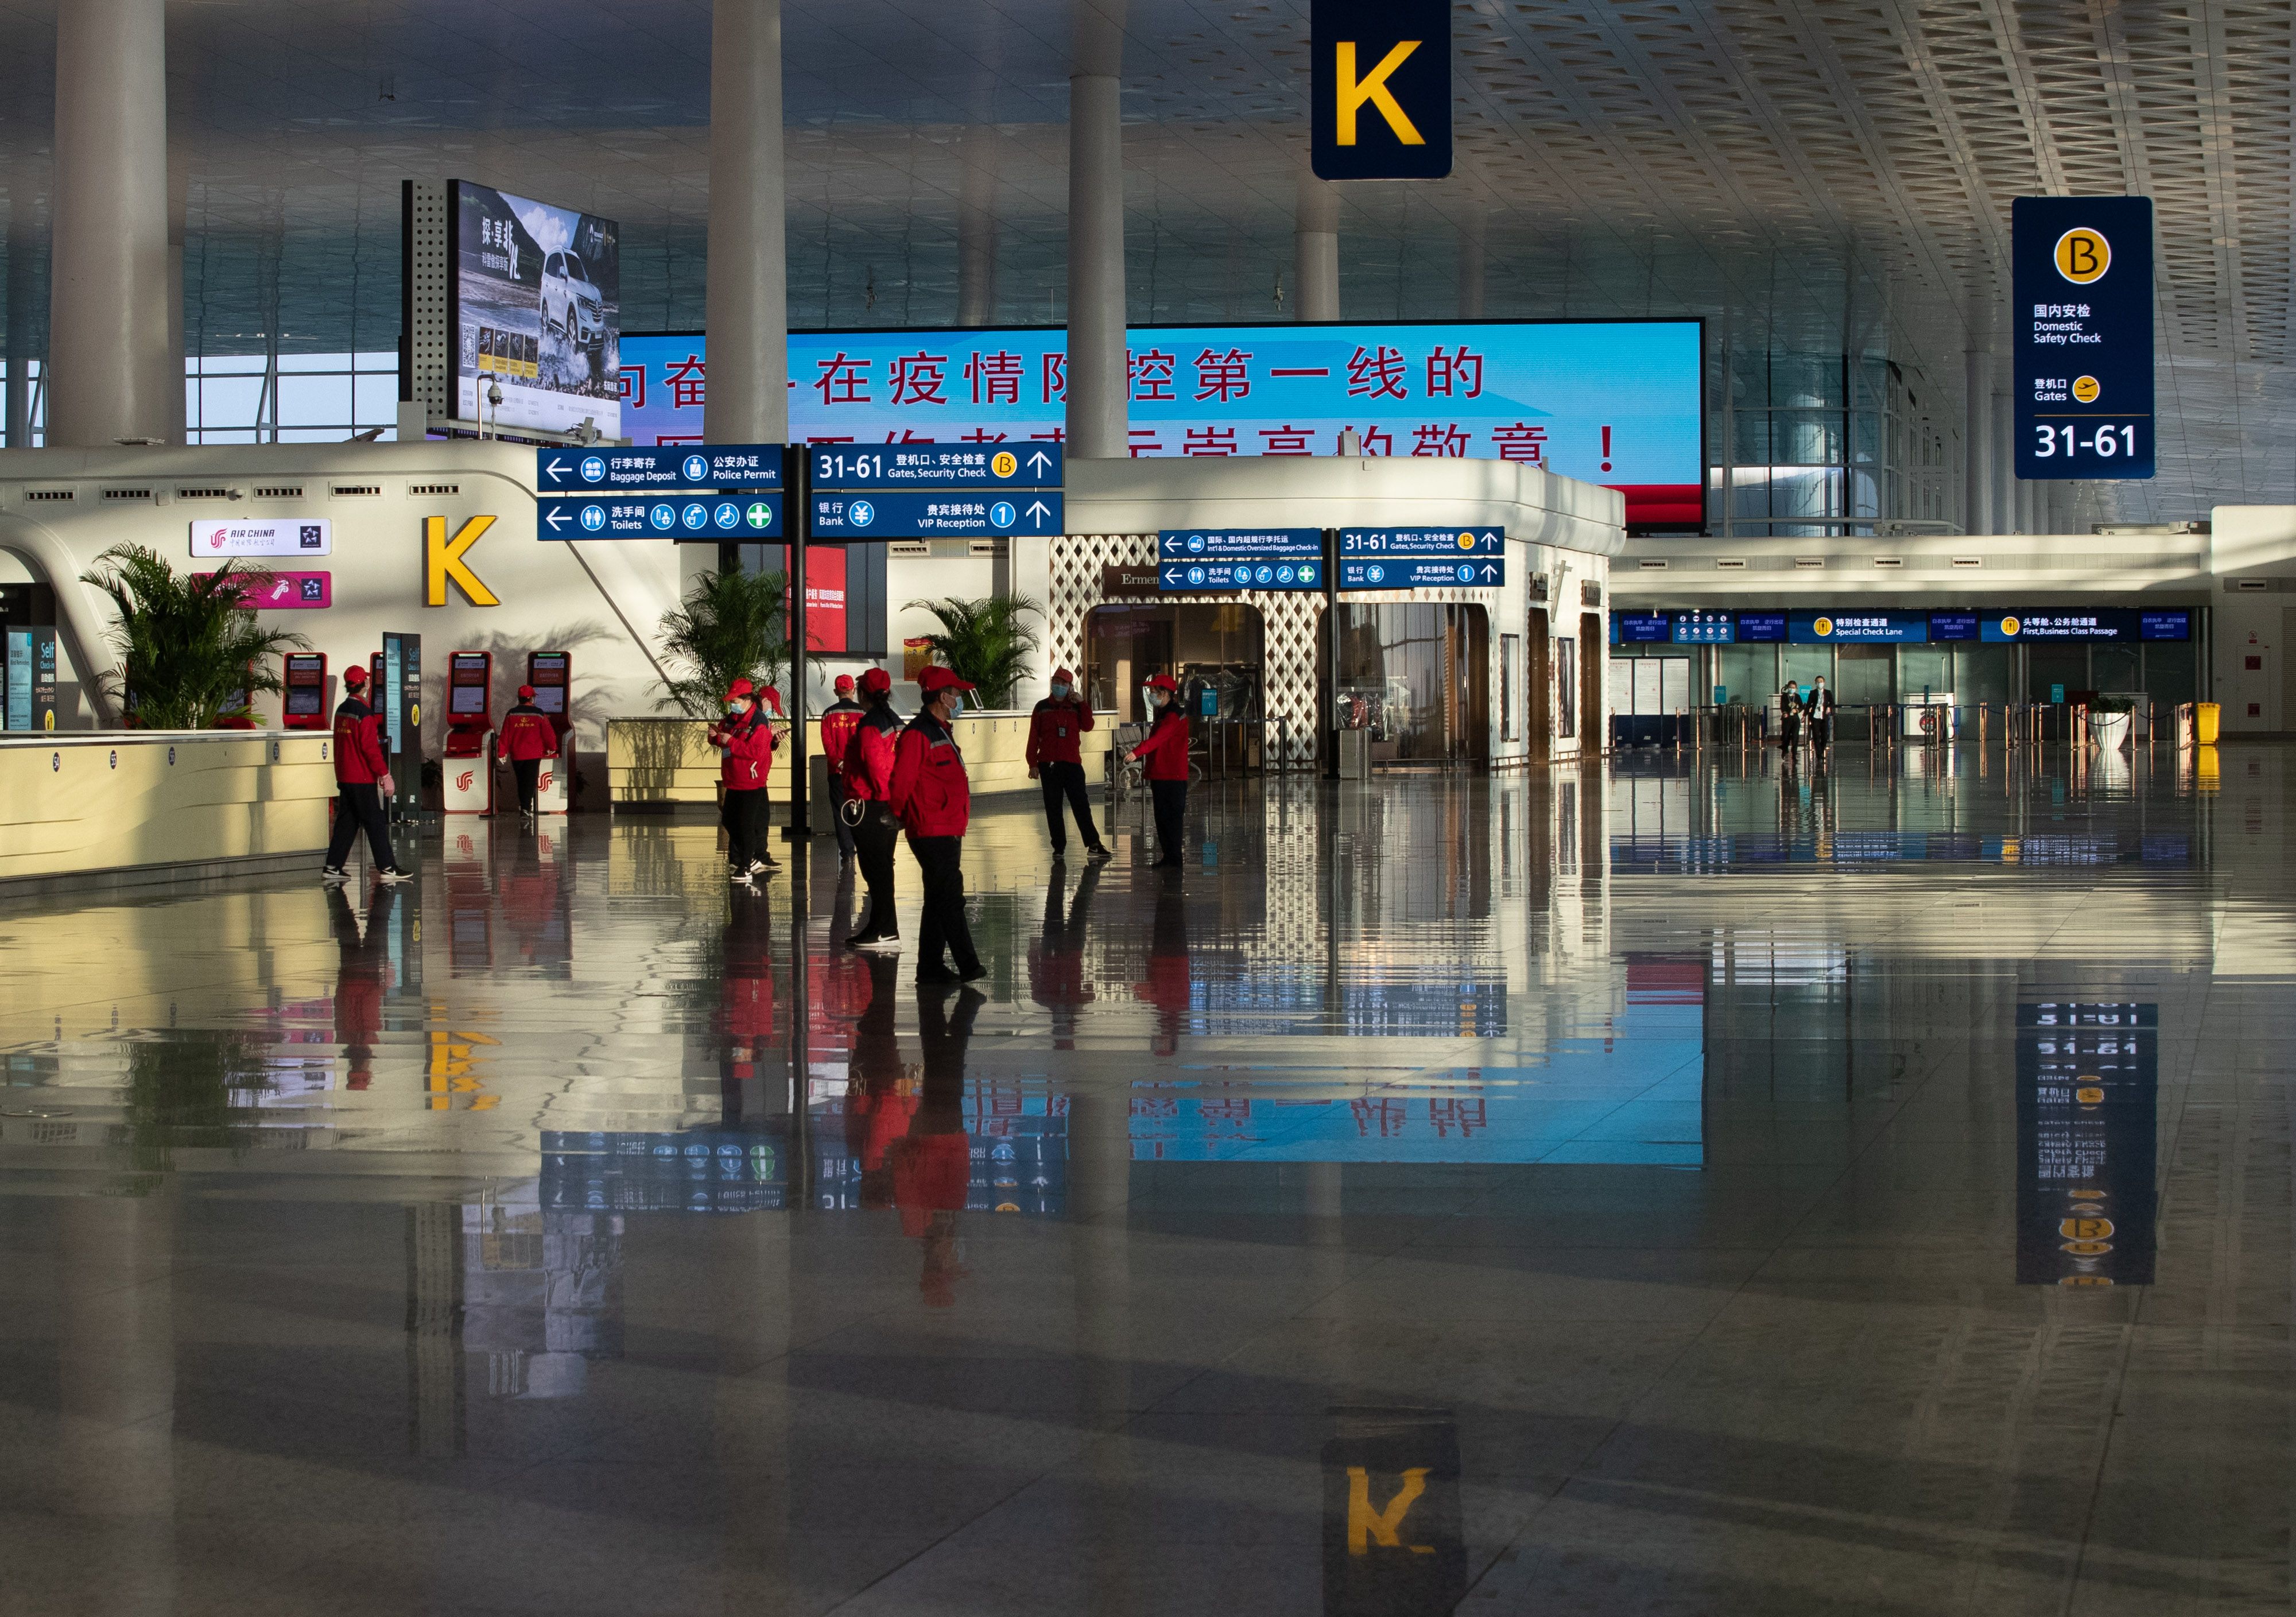 The Wuhan Tianhe airport in Wuhan has been closed to passenger flights since the city was locked down on January 23 due to the COVID-19 coronavirus outbreak.